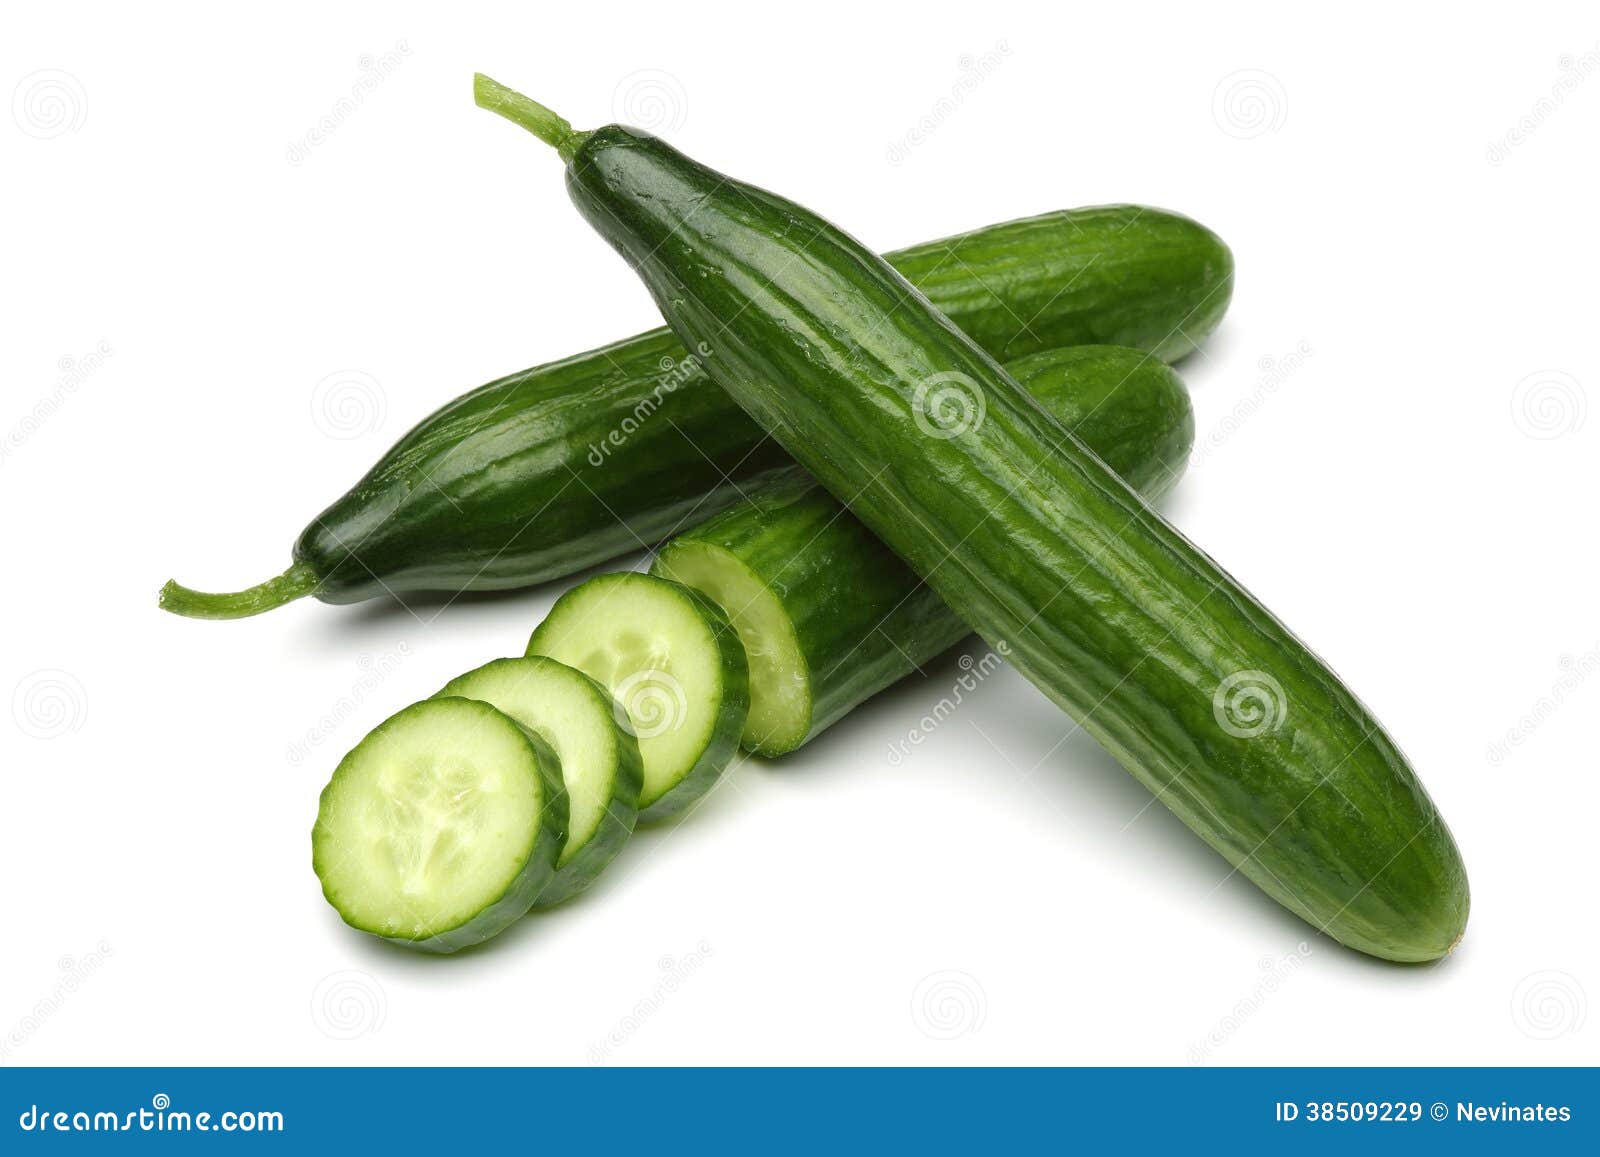 cucumbers and cucumbers slices